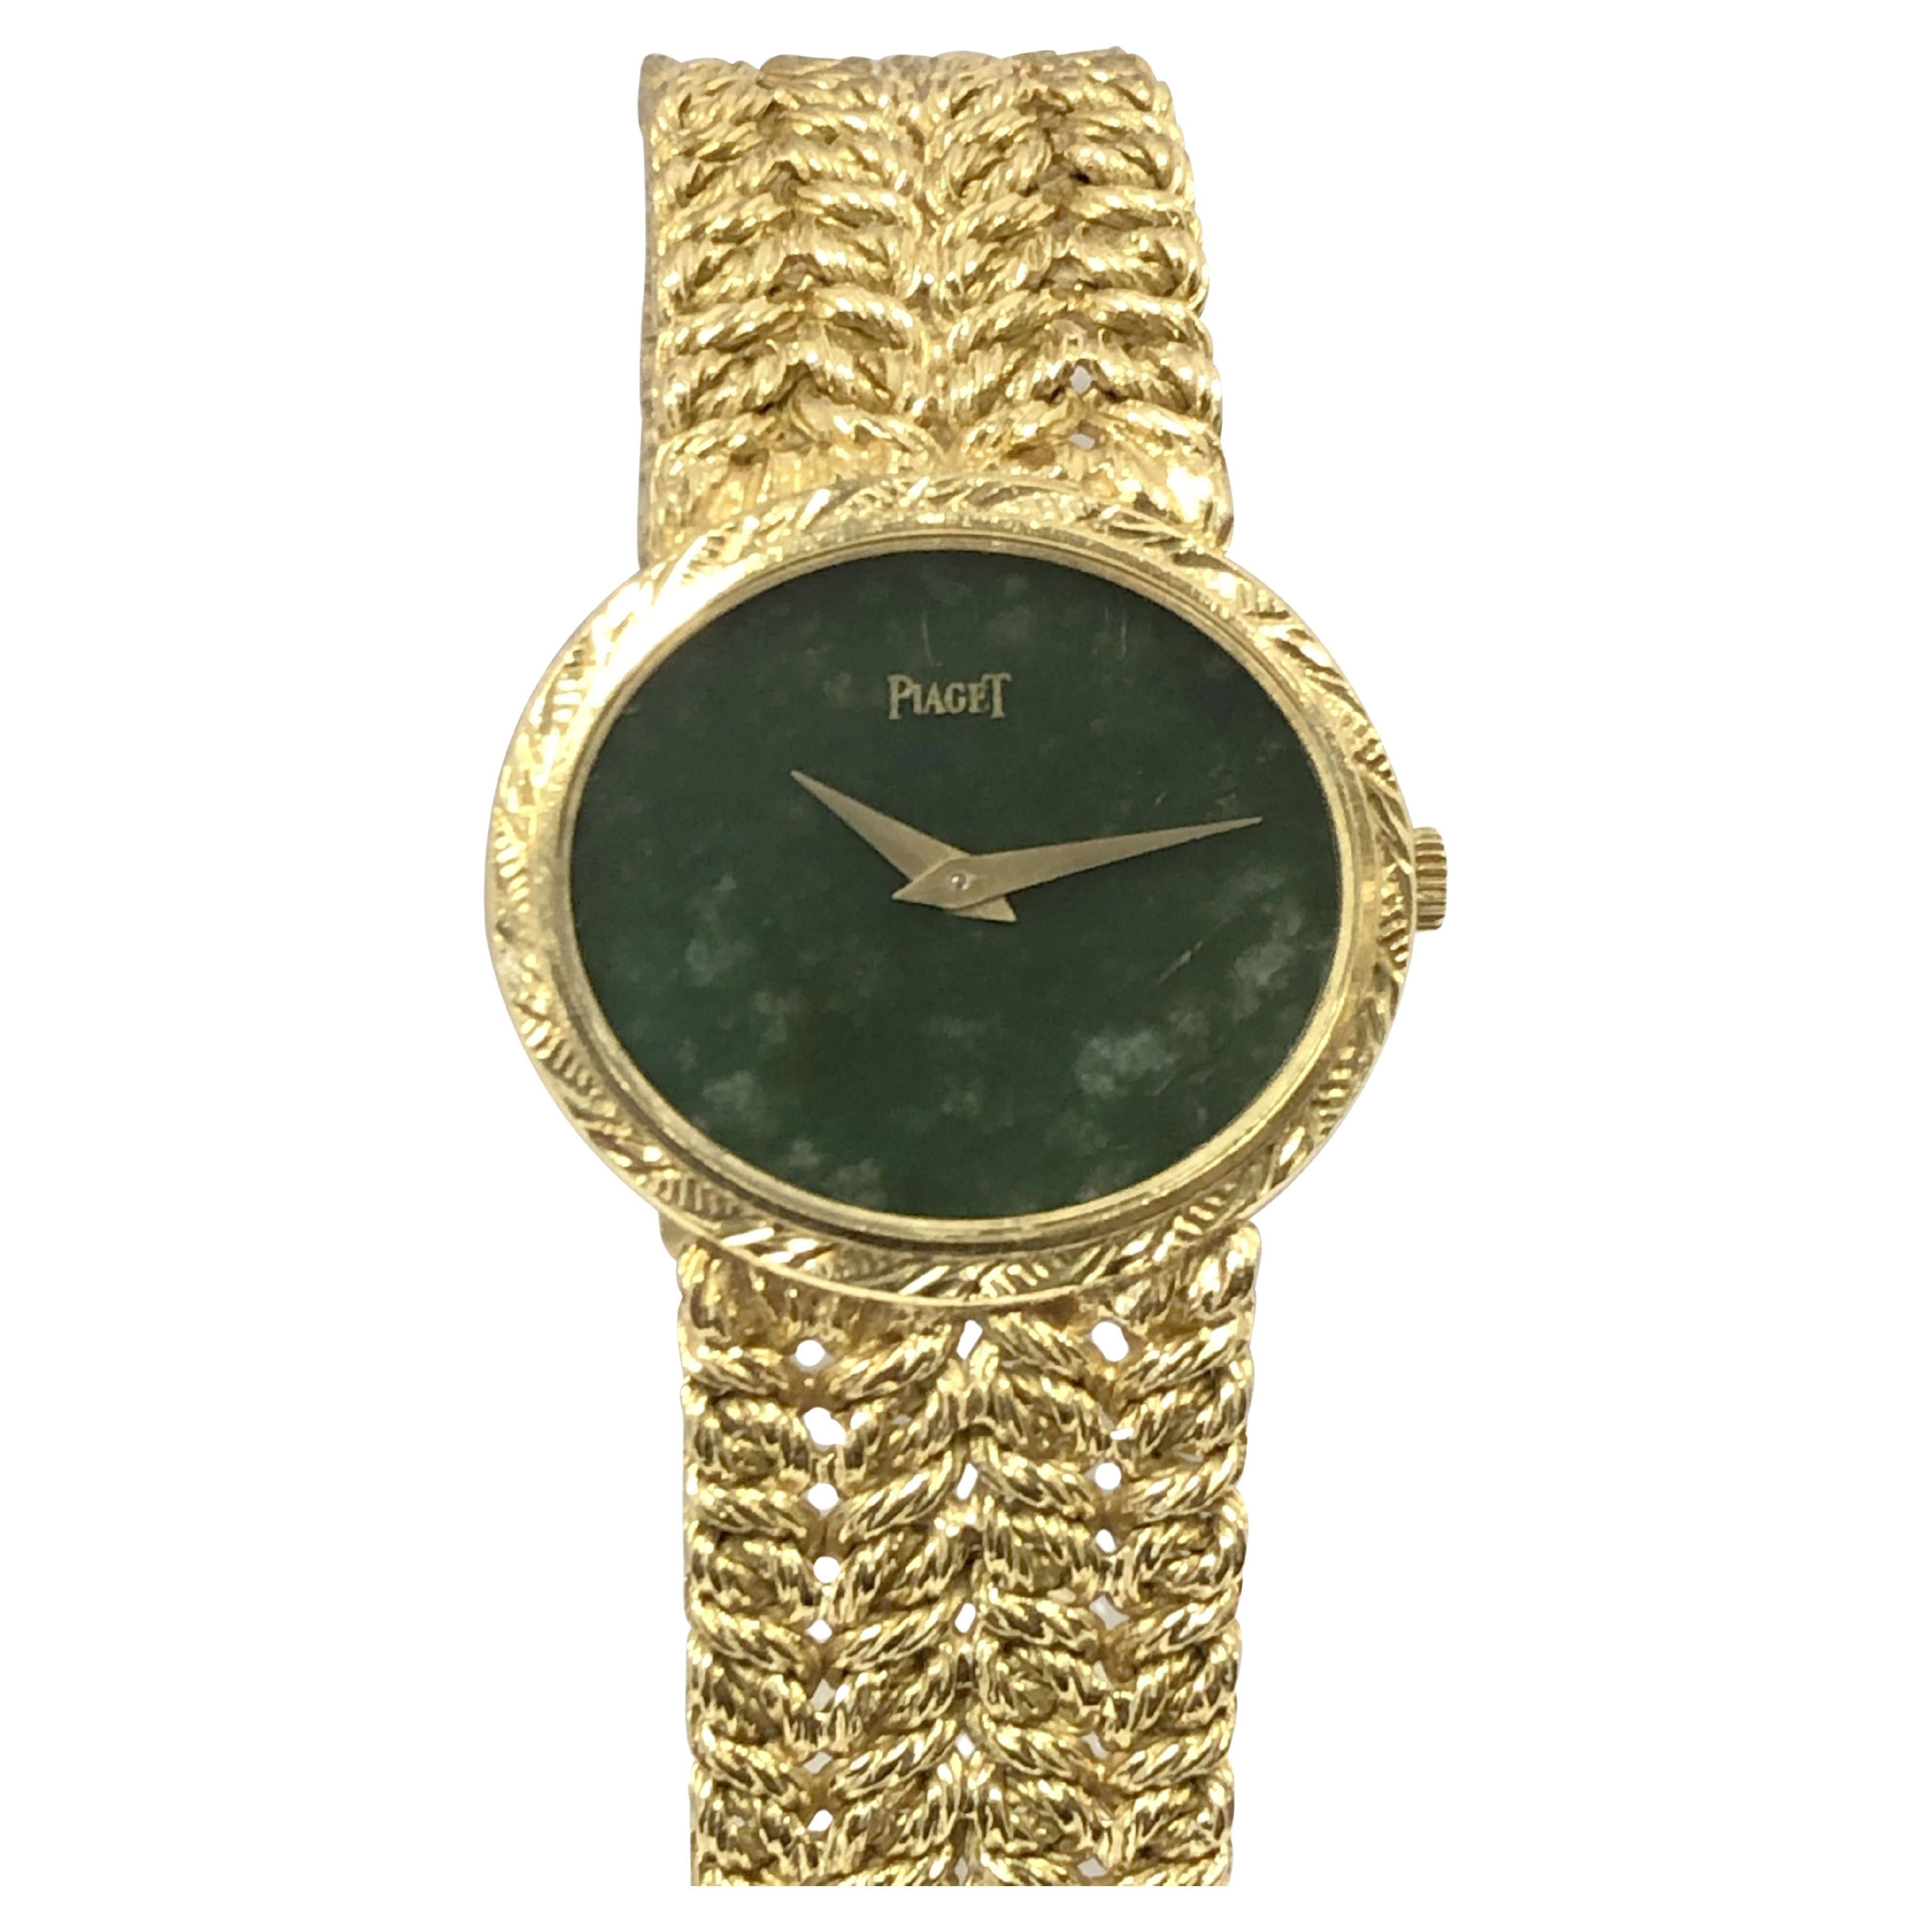 Piaget Vintage Yellow Gold and Nephrite Dial Ladies Mechanical Wrist Watch